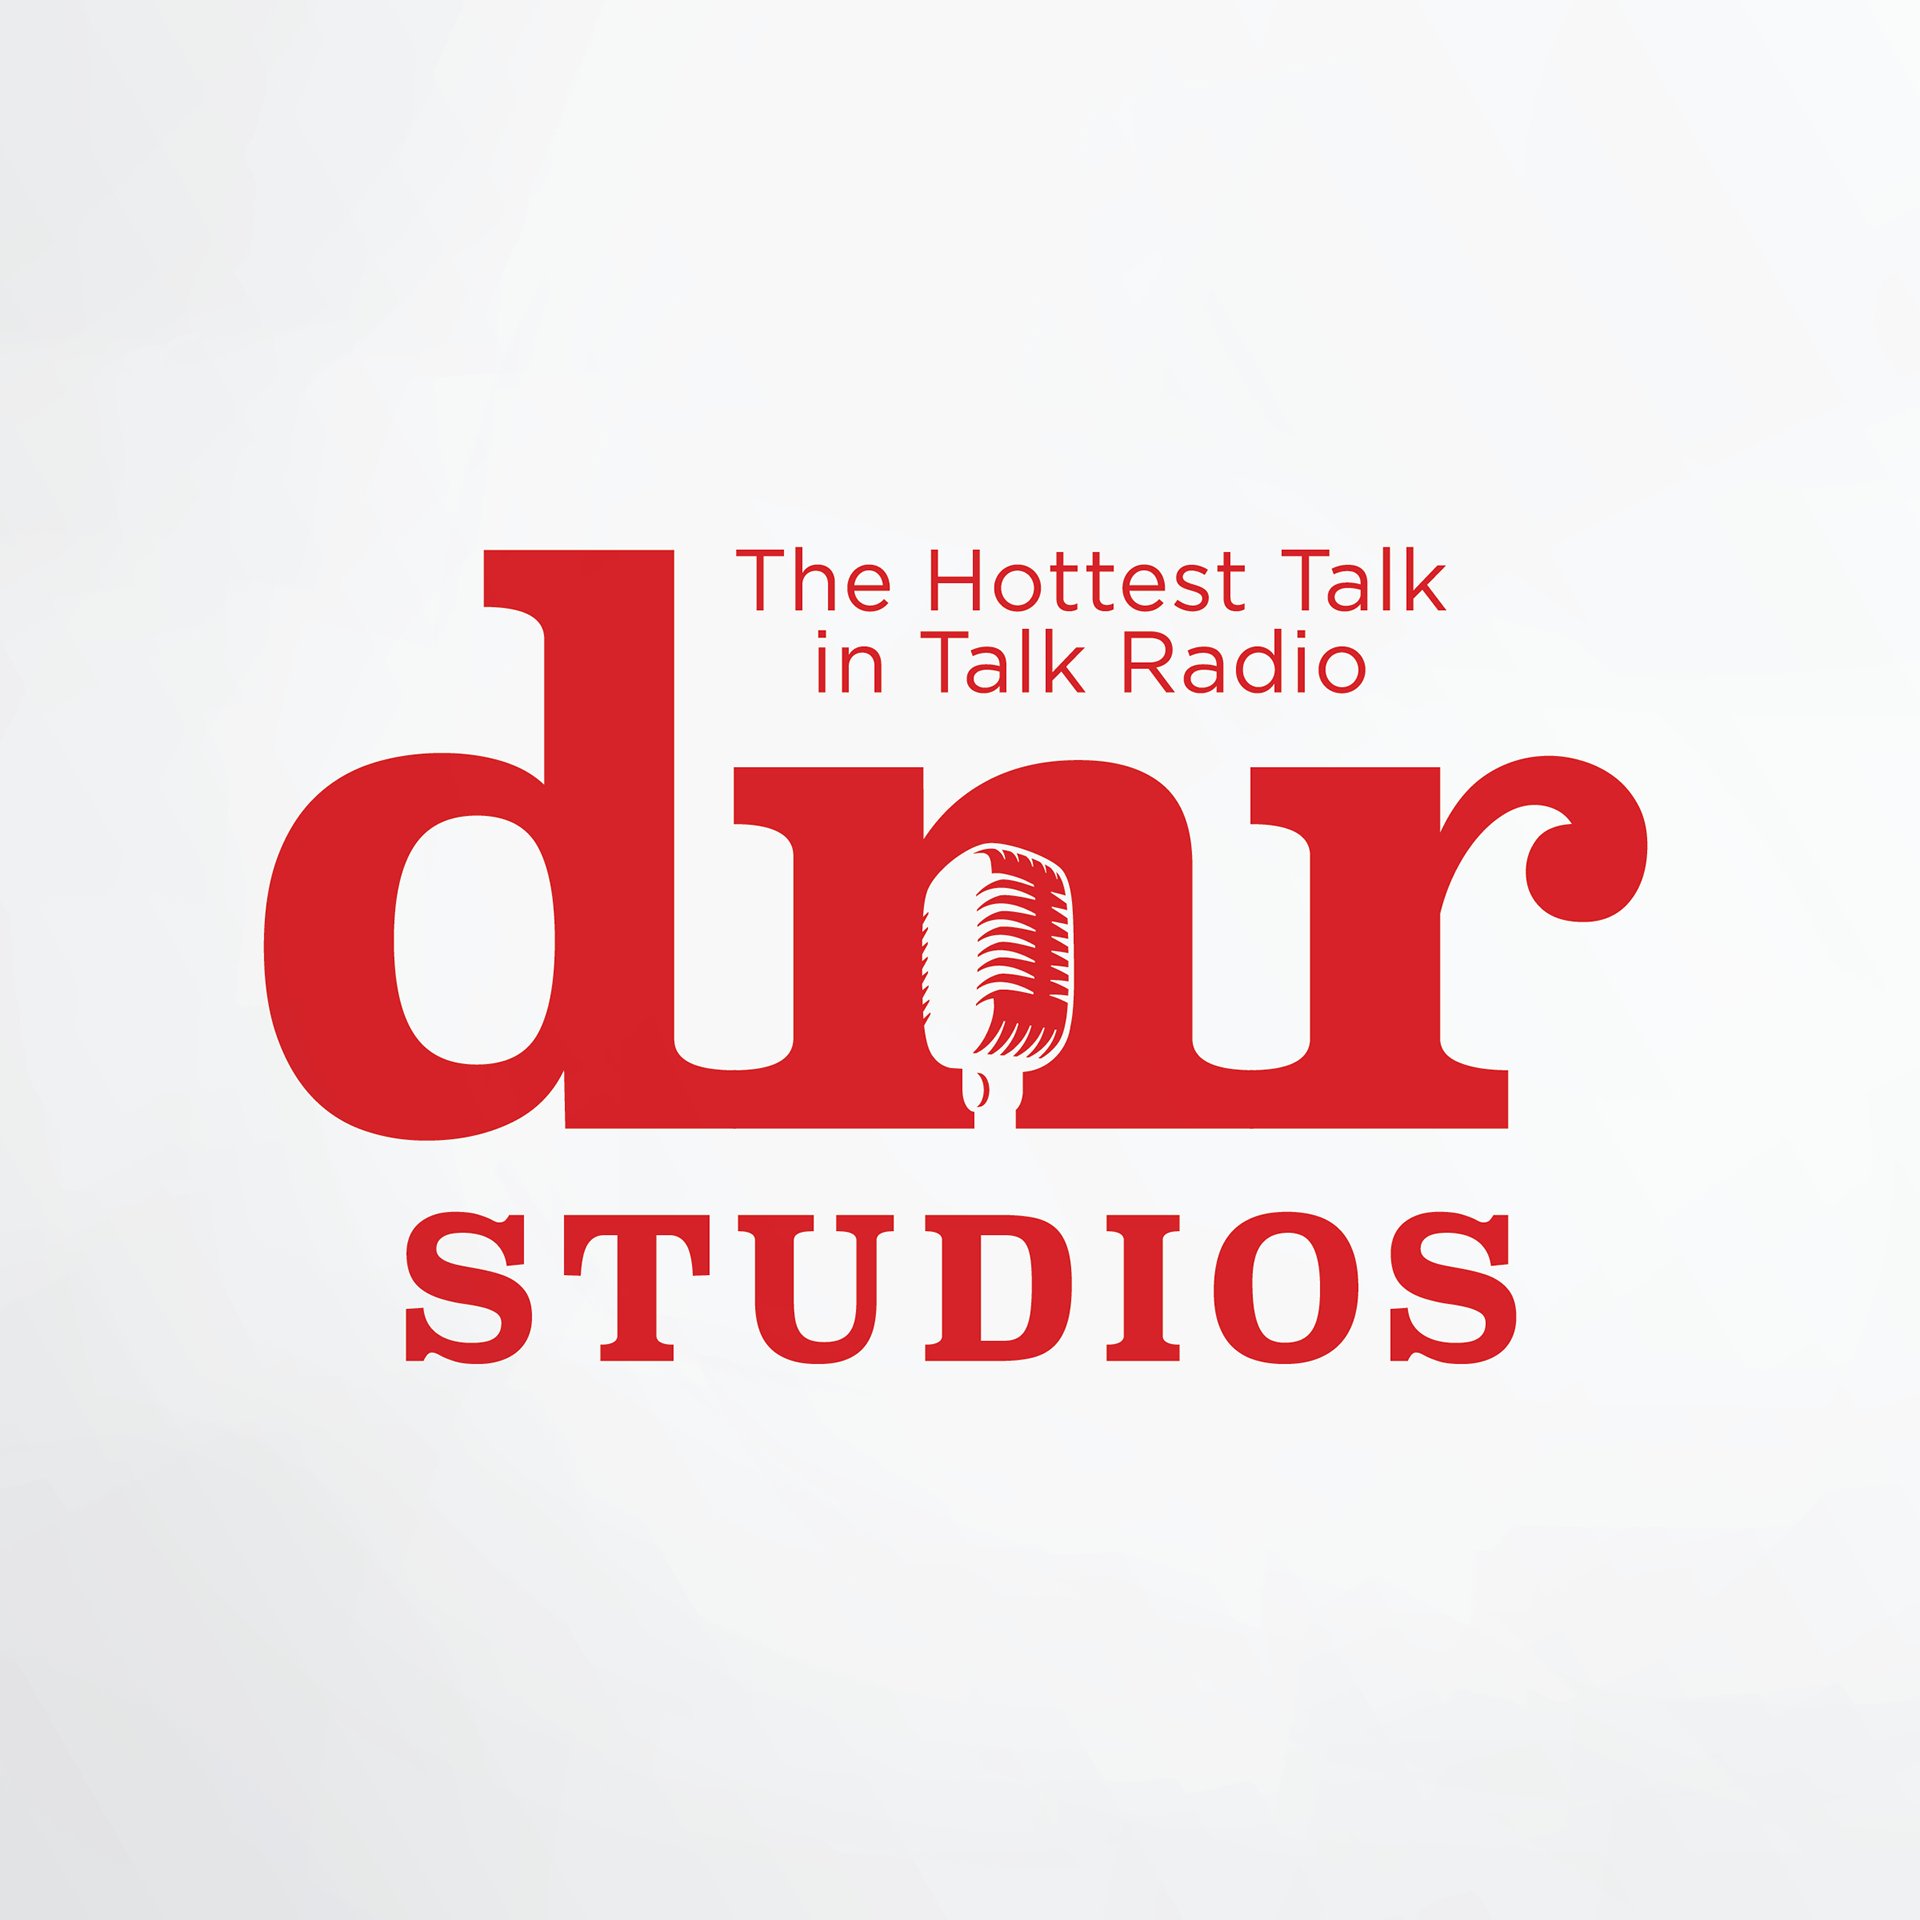 DNR Studios, home to the hottest talk in talk radio. Check out our podcasts and daily radio shows at https://t.co/jZxFWyTJMP. DNRcast app available now for iPhone